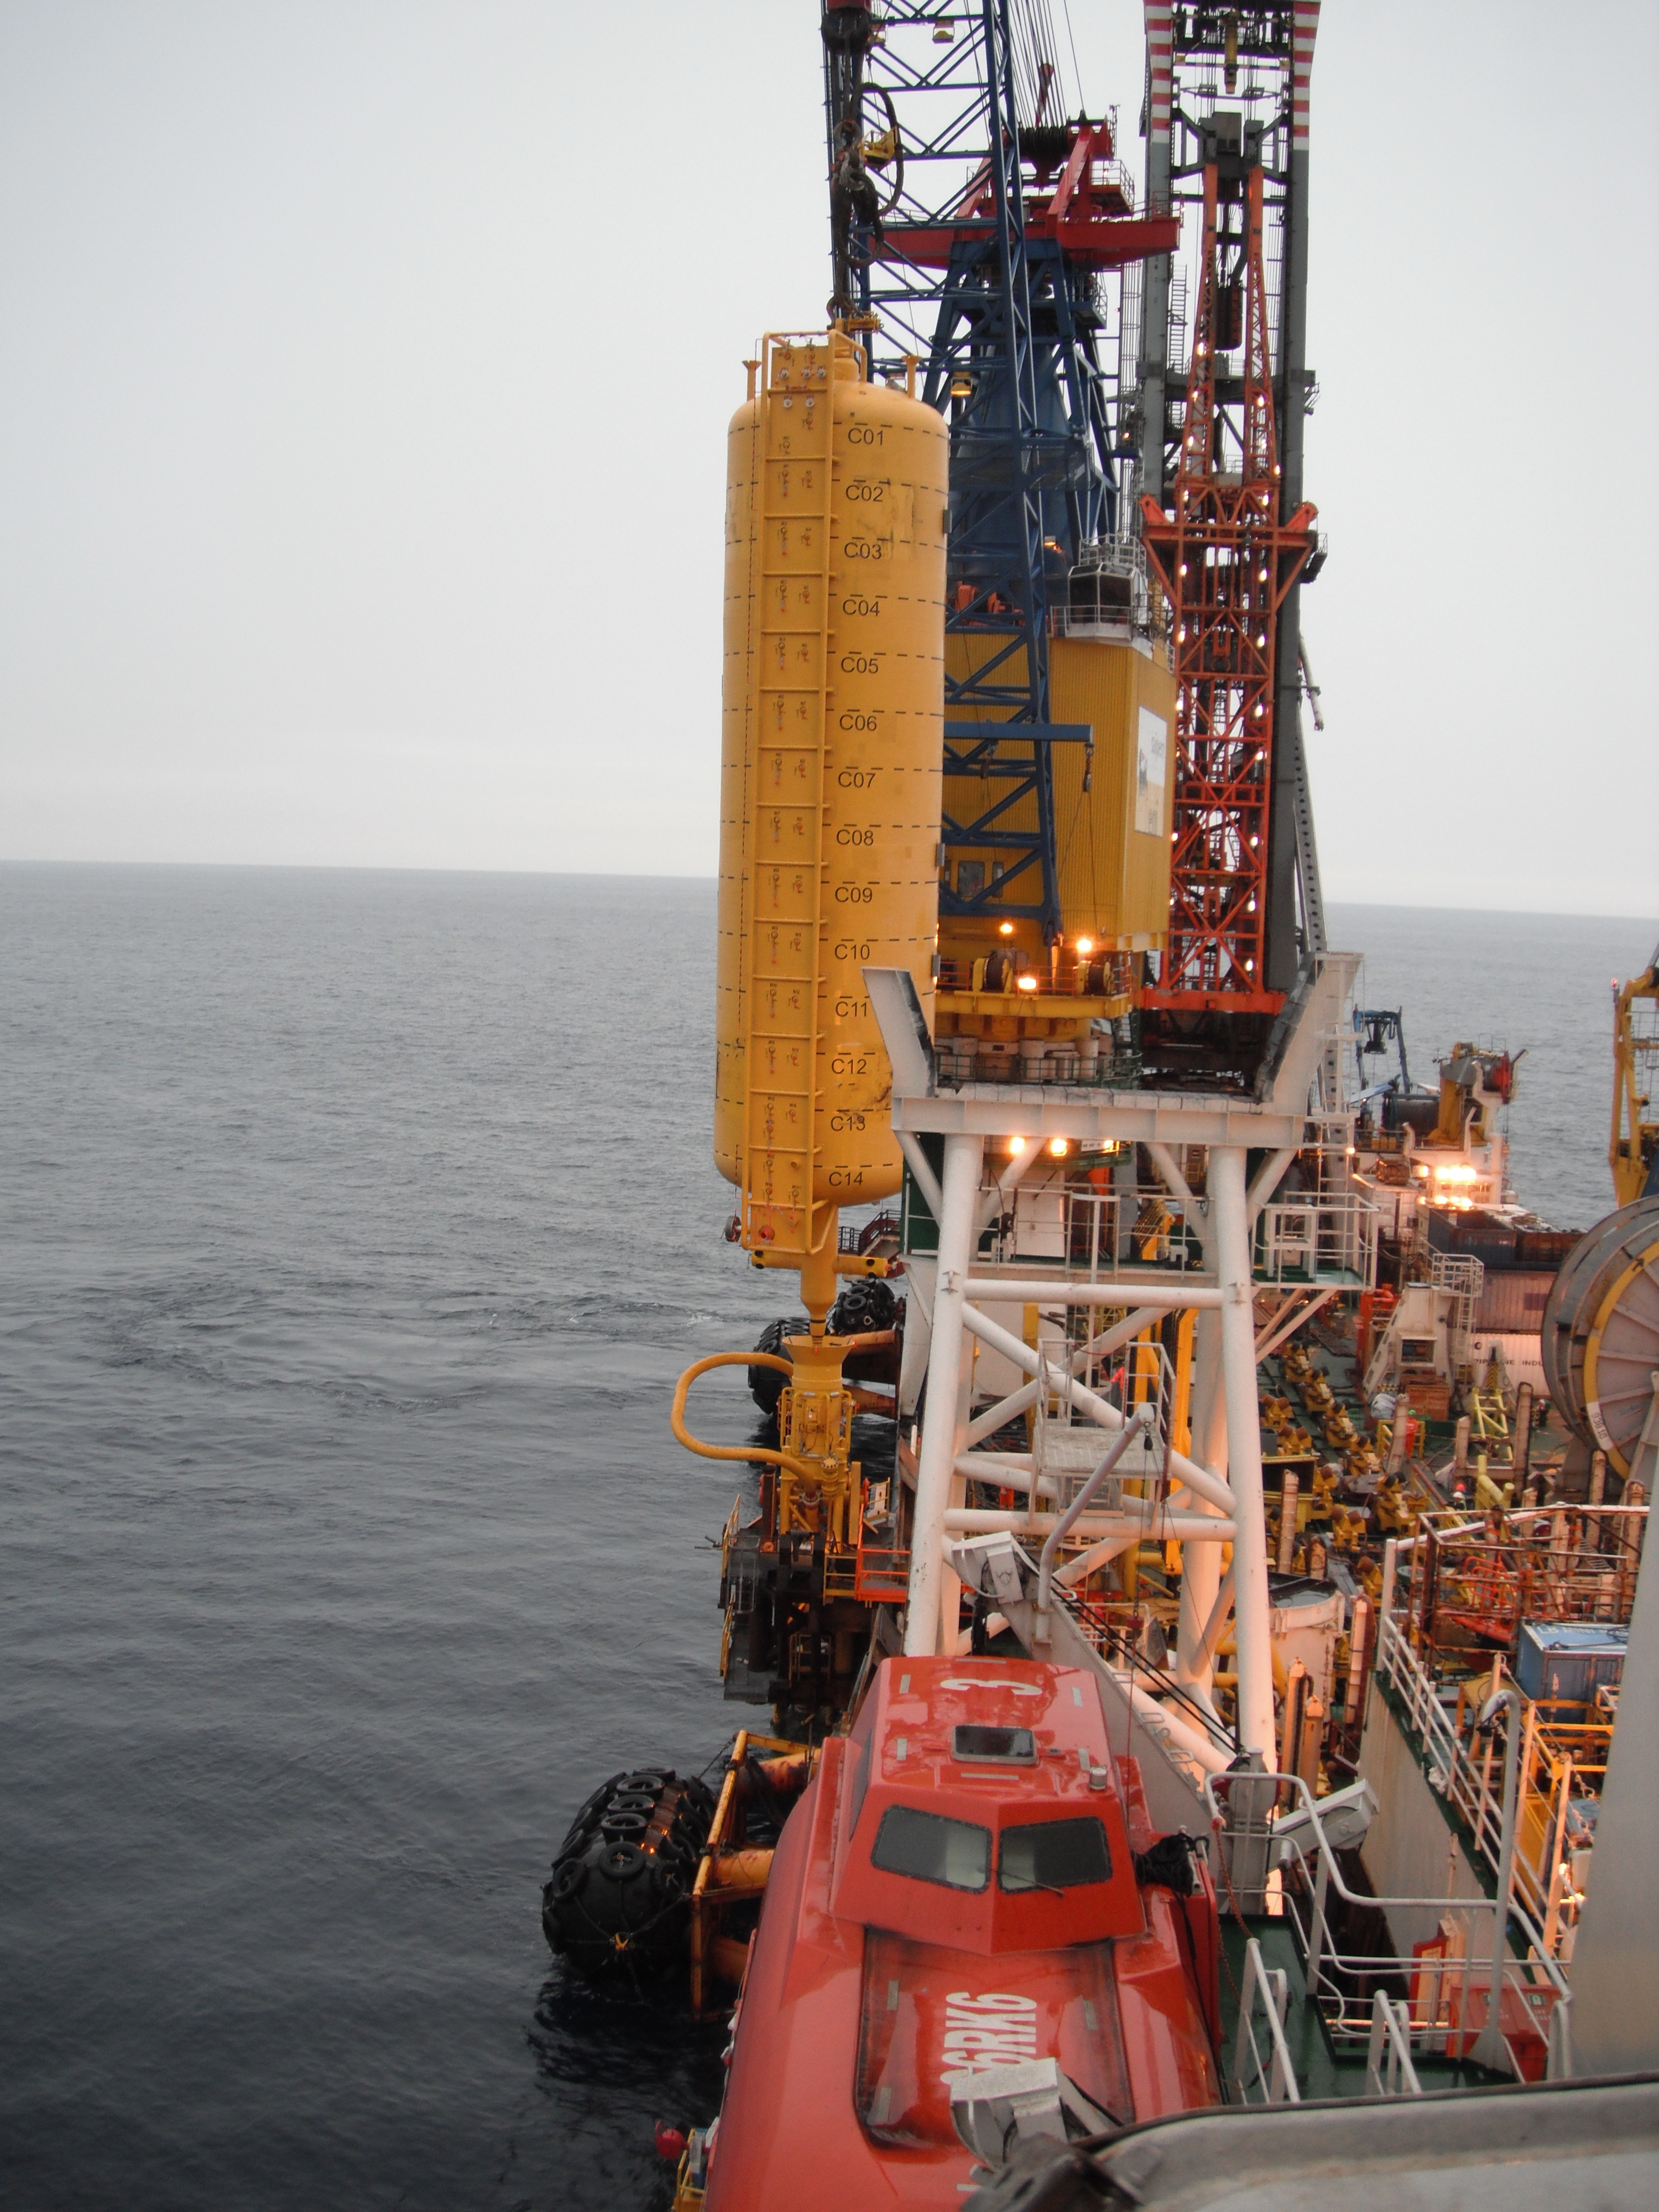 A picture of a hybrid riser tower monitoring system at sea